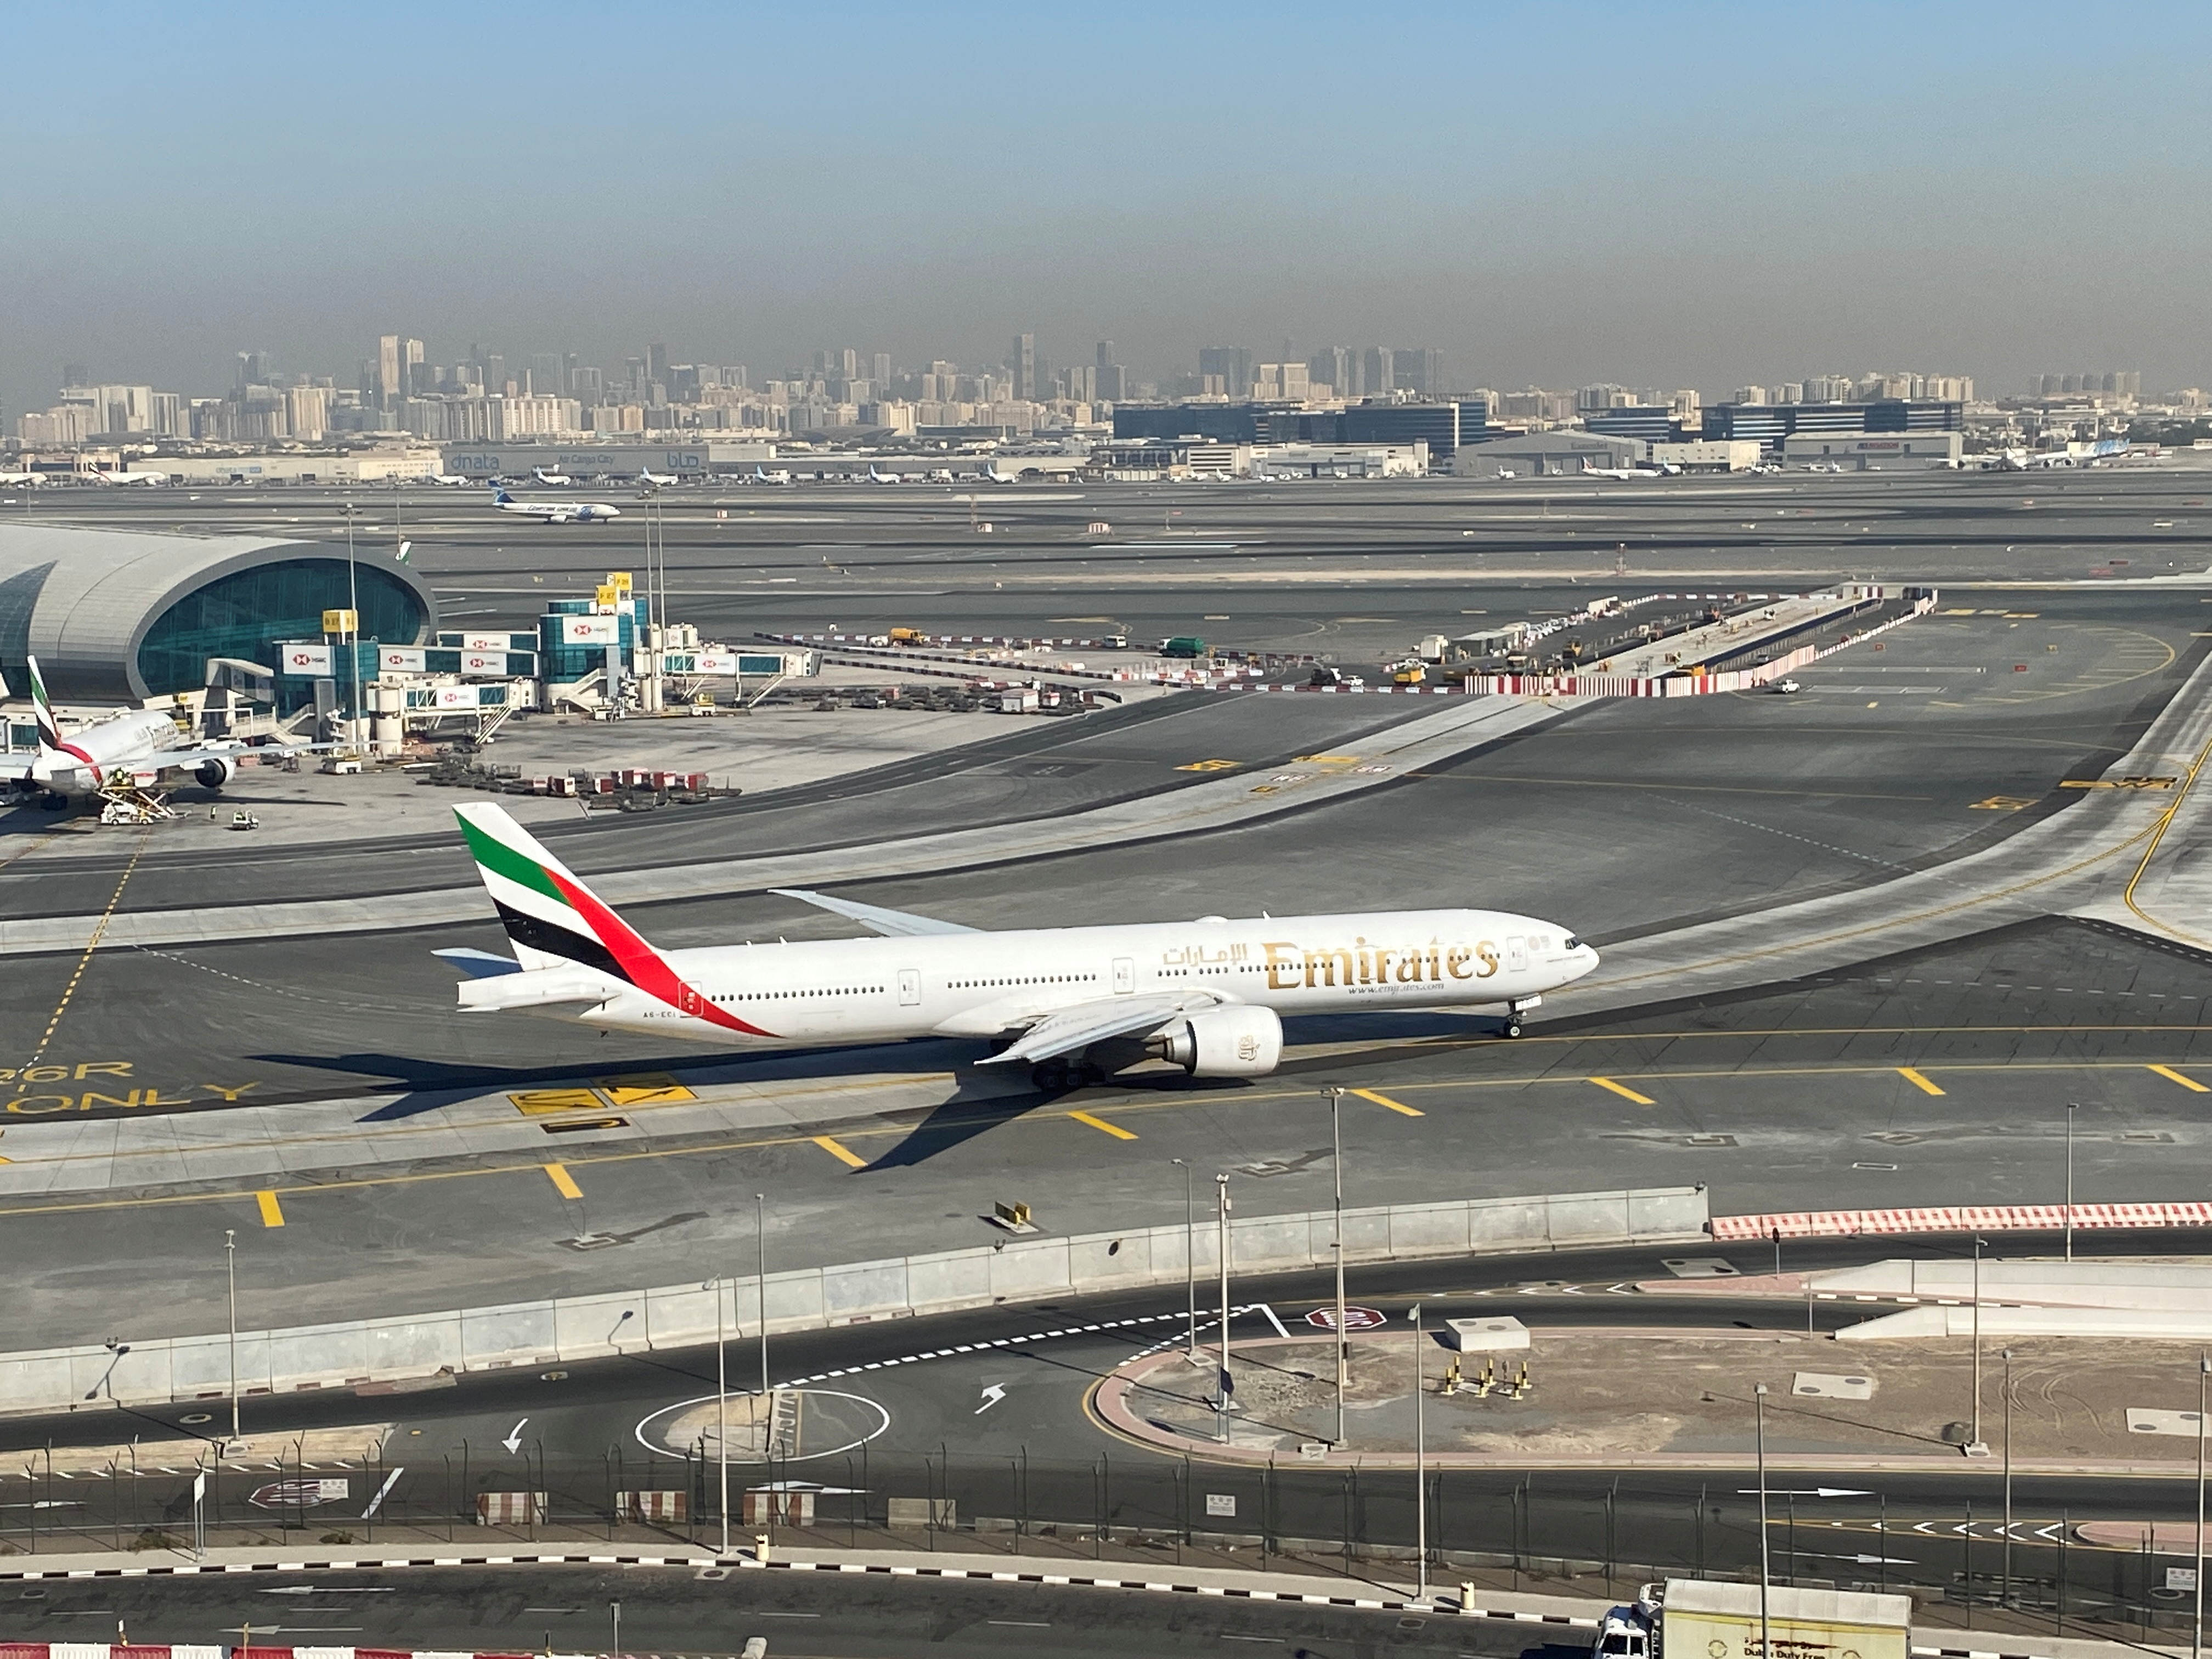 Emirates airline sees full fleet returning to the skies this year